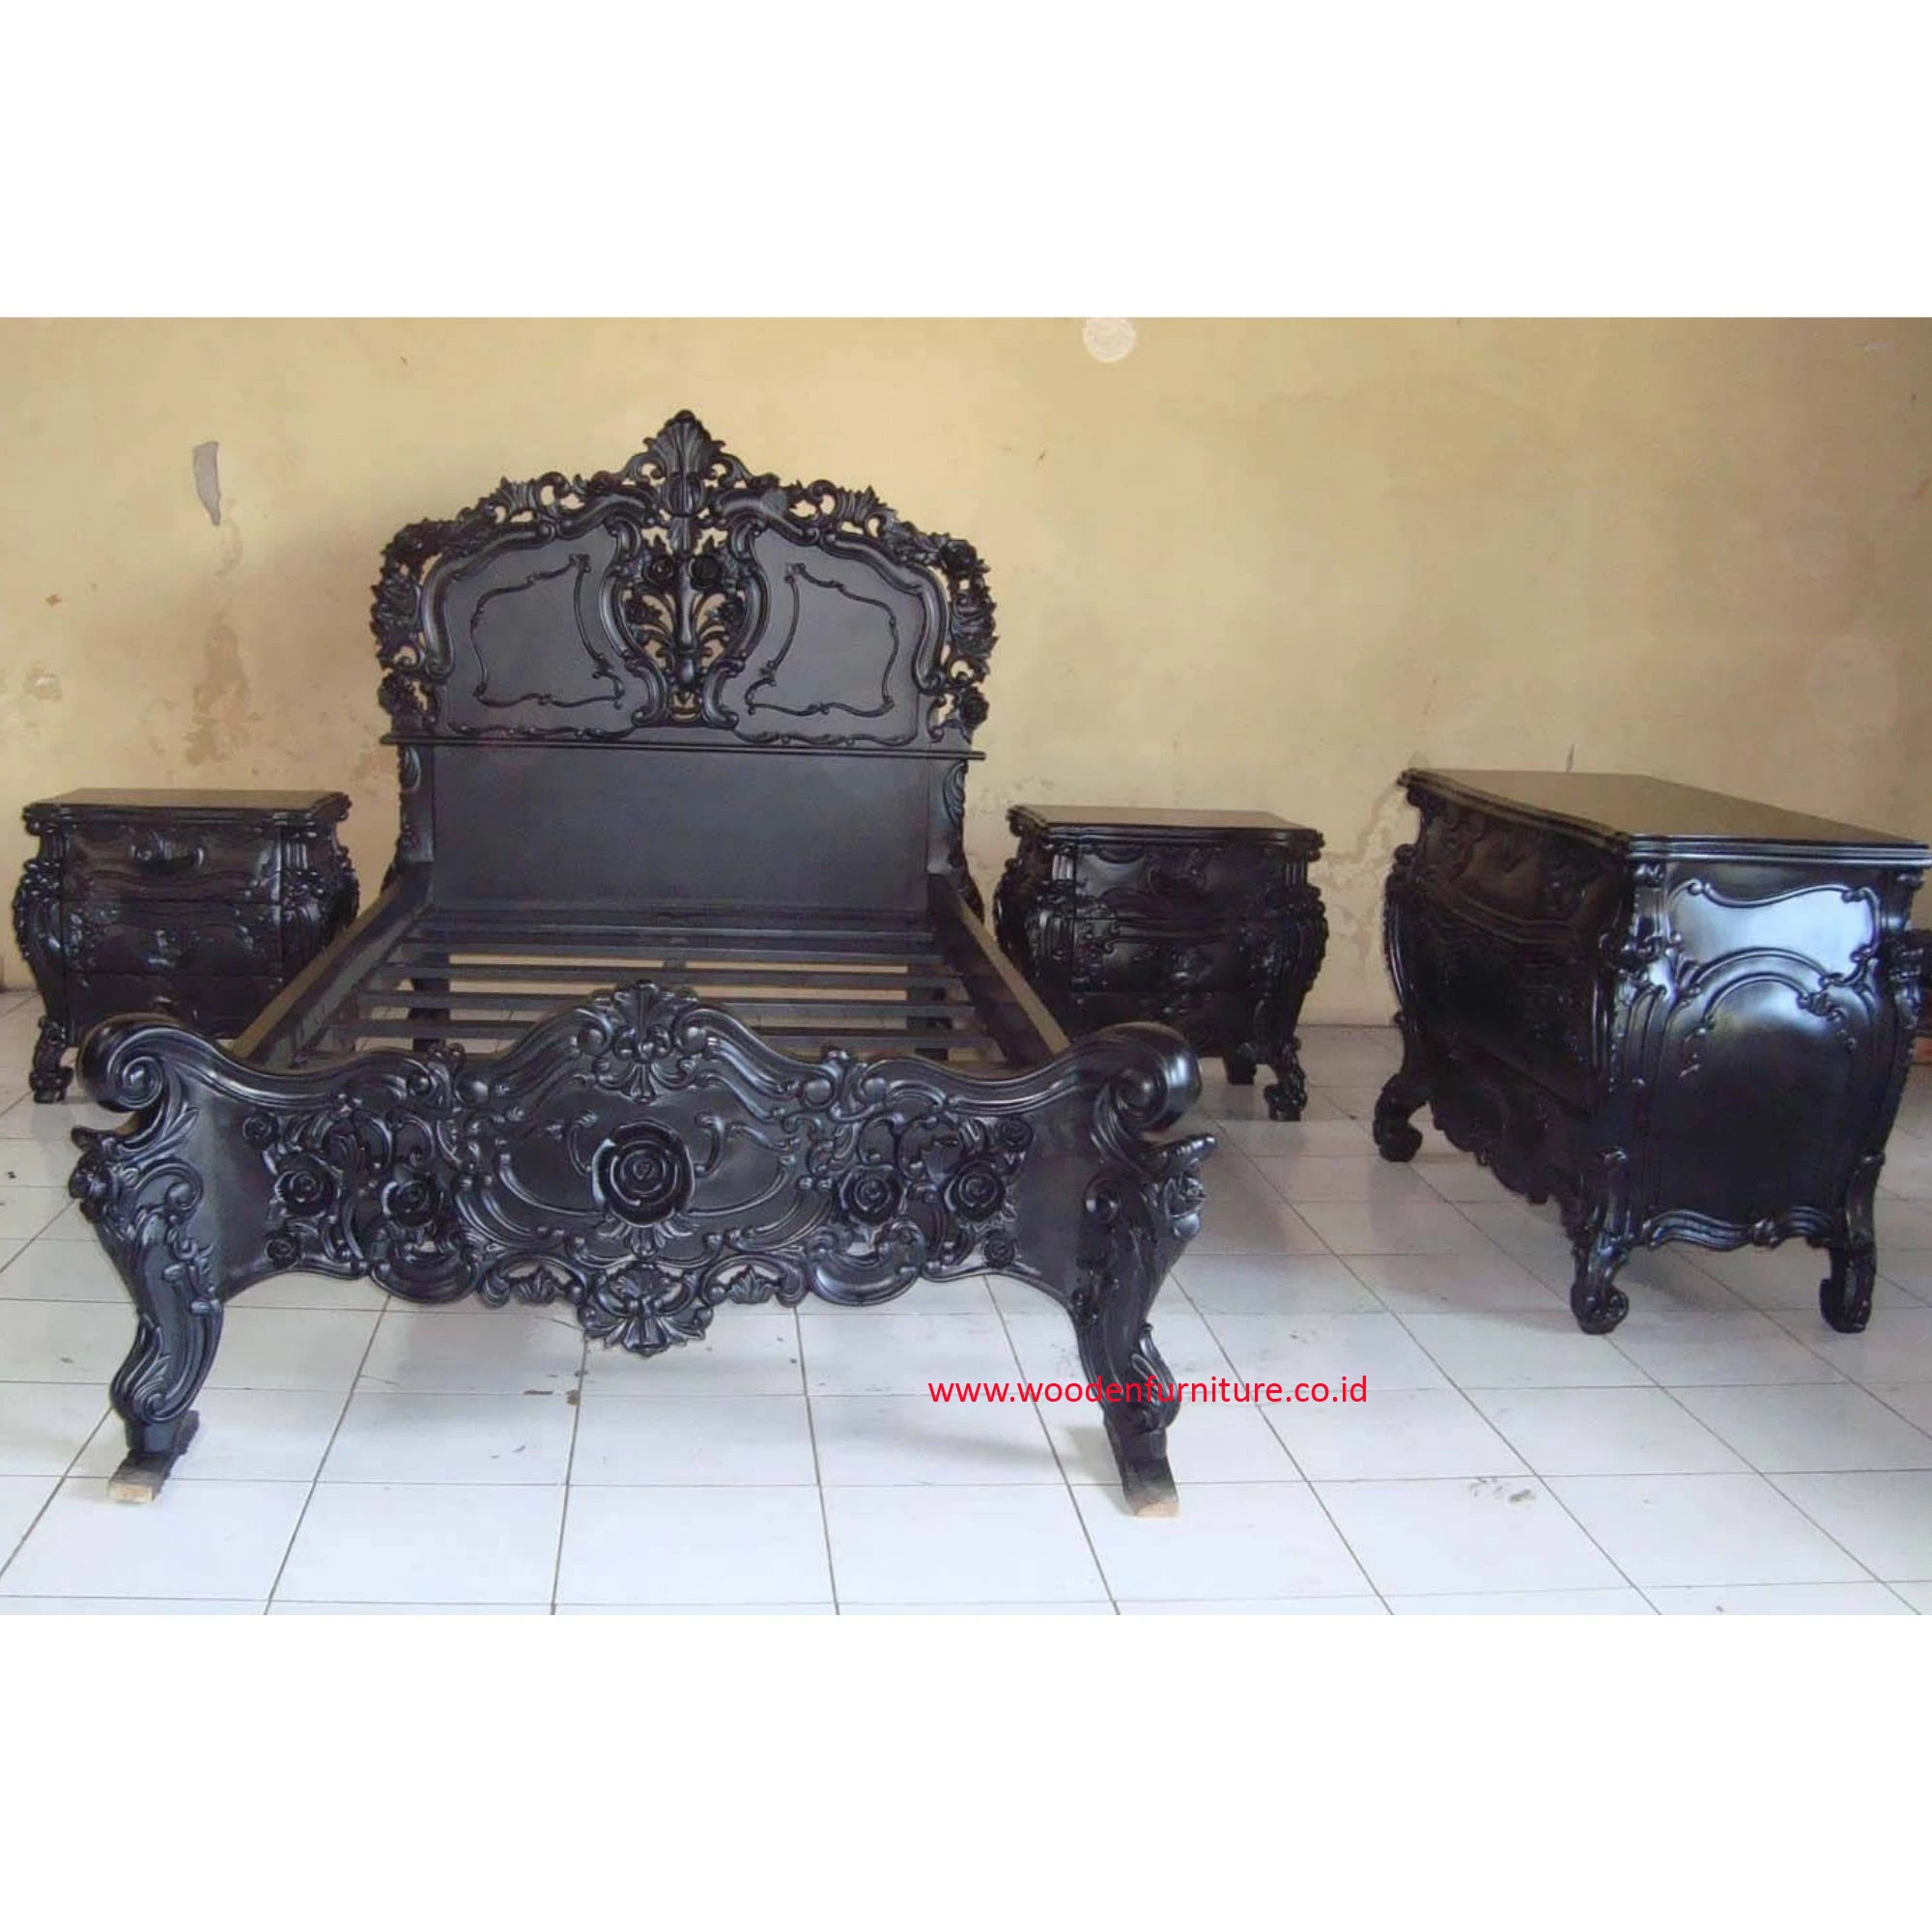 Rococo Bed Set Vintage Wooden Bed Antique Reproduction Furniture French Provincial Bedroom European Style Home Furniture